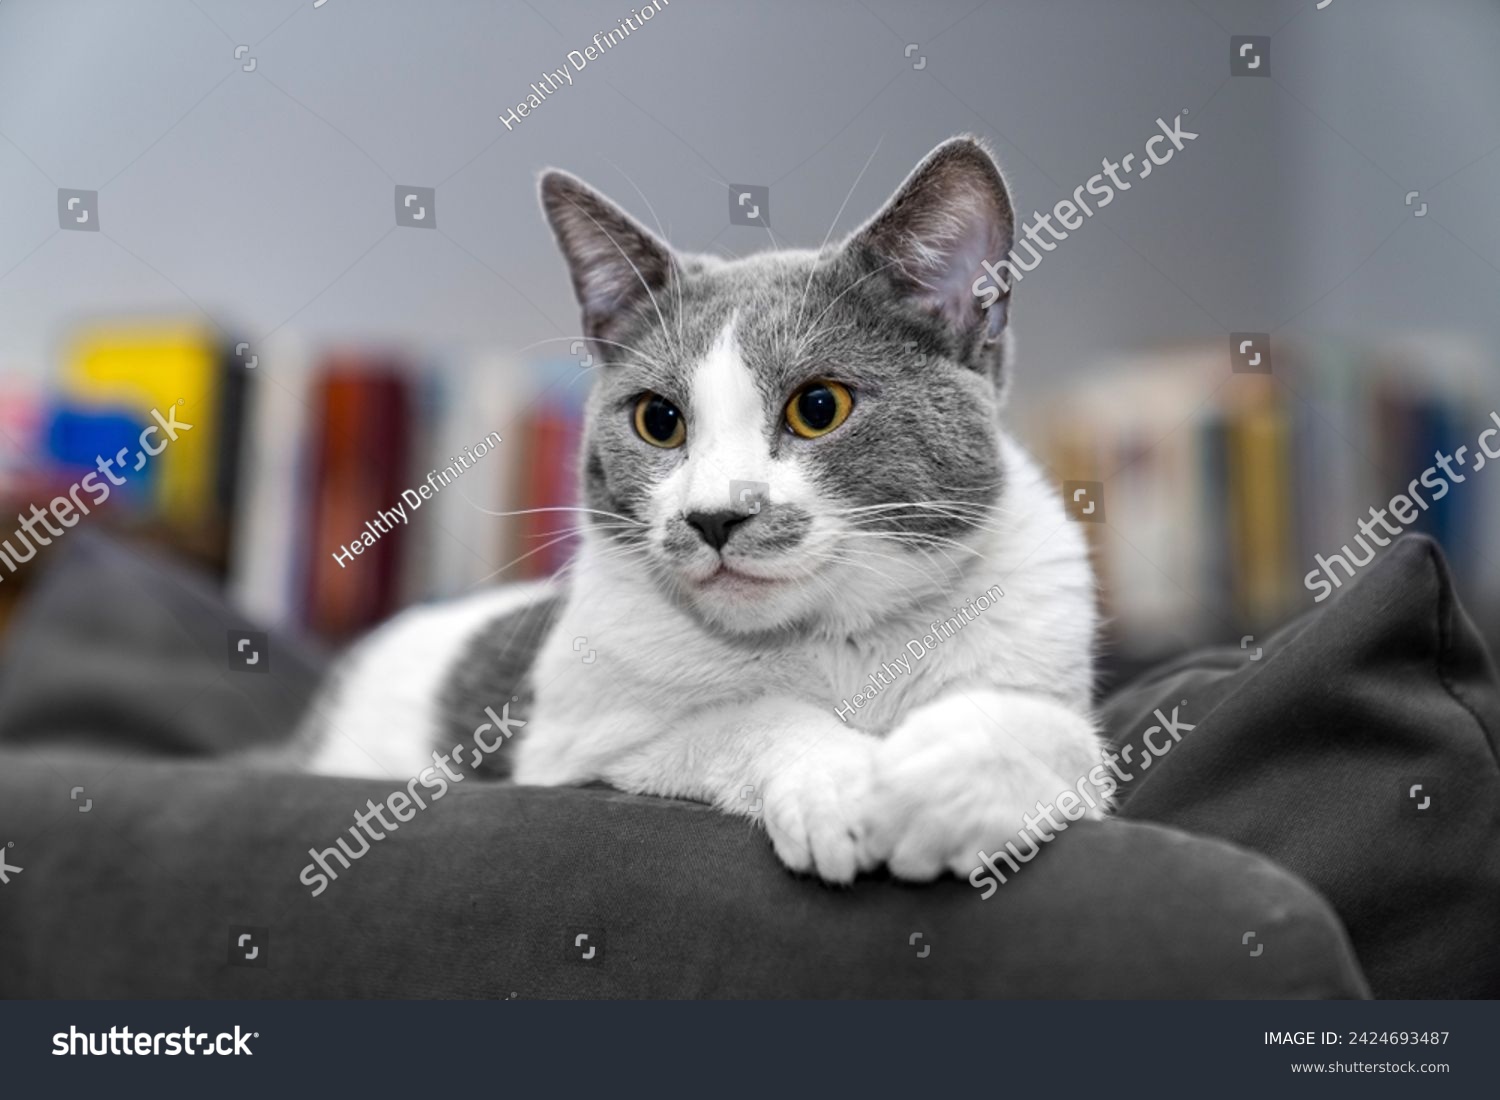 grey and white cat portrait. Muzzle of a gray fluffy cat close-up lying on the couch or sofa or bed. grey background. big eyes. copy space. pet ownership, pet friendship concept. Pet portrait. #2424693487